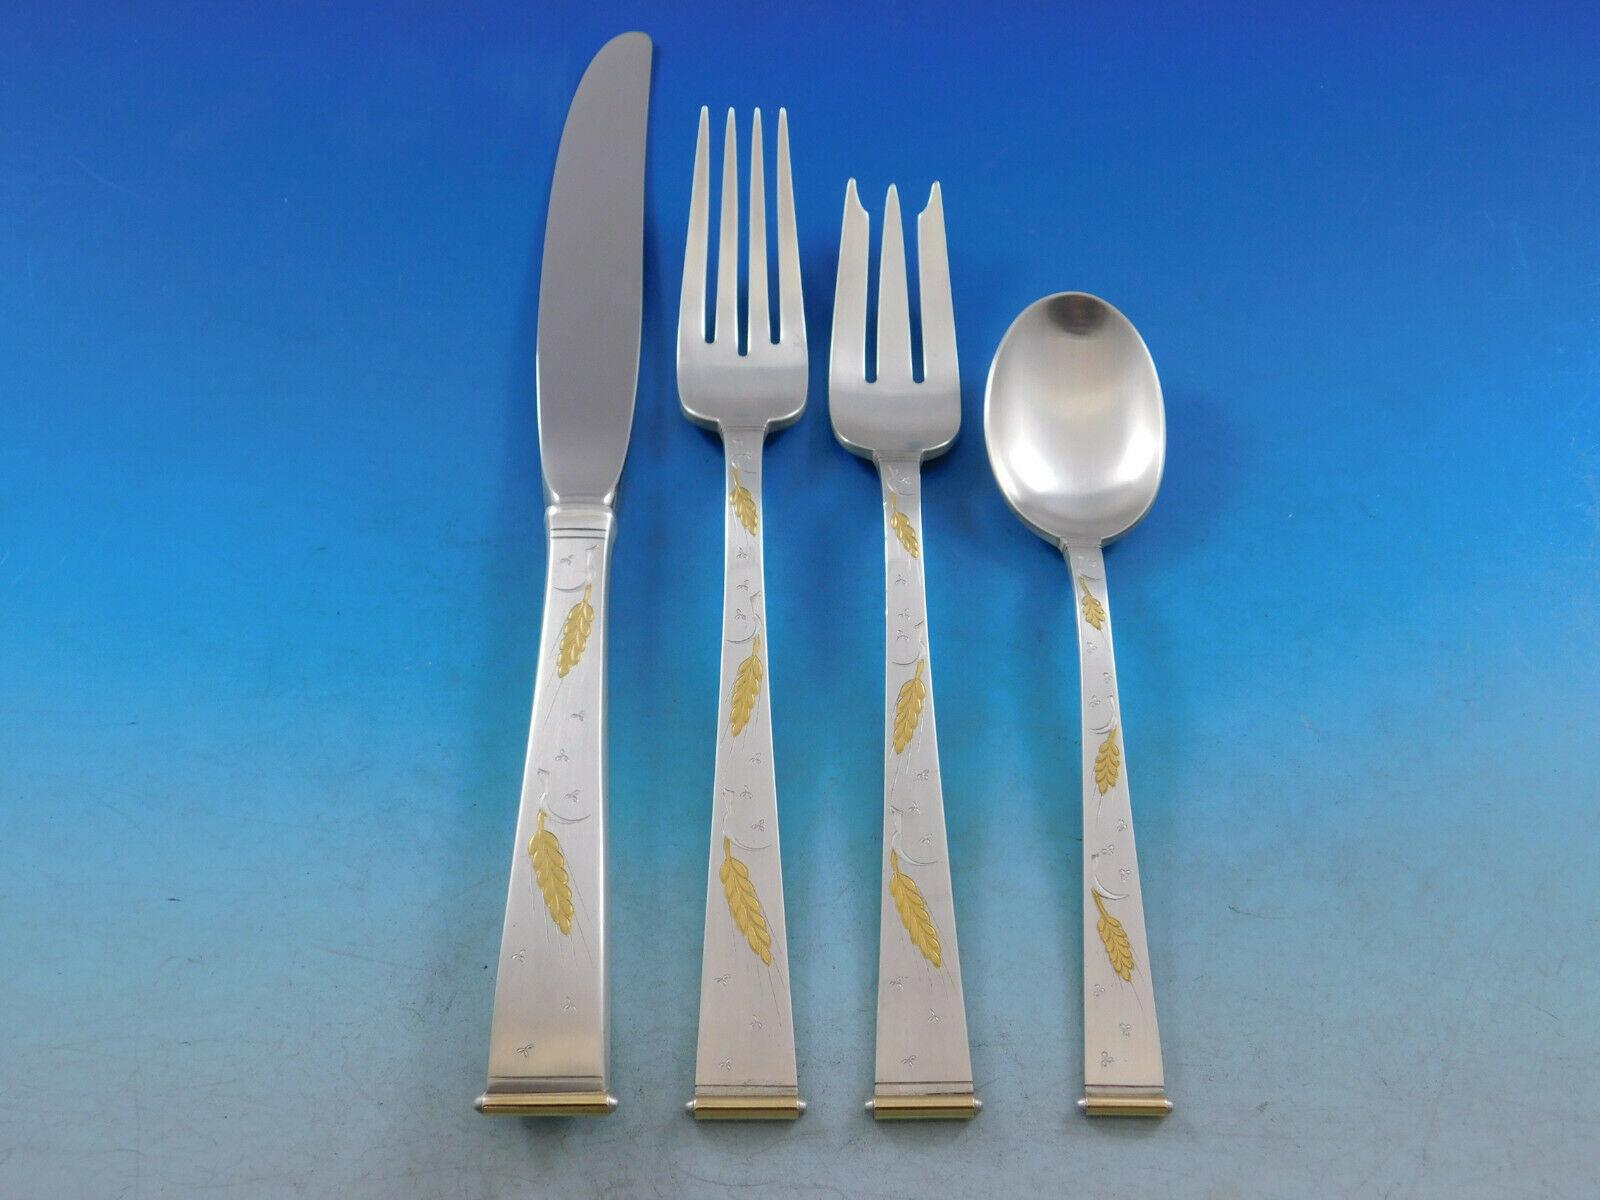 Scarce golden wheat by Gorham Sterling Silver Flatware set - 97 pieces. This set includes:
12 knives, 9 1/4